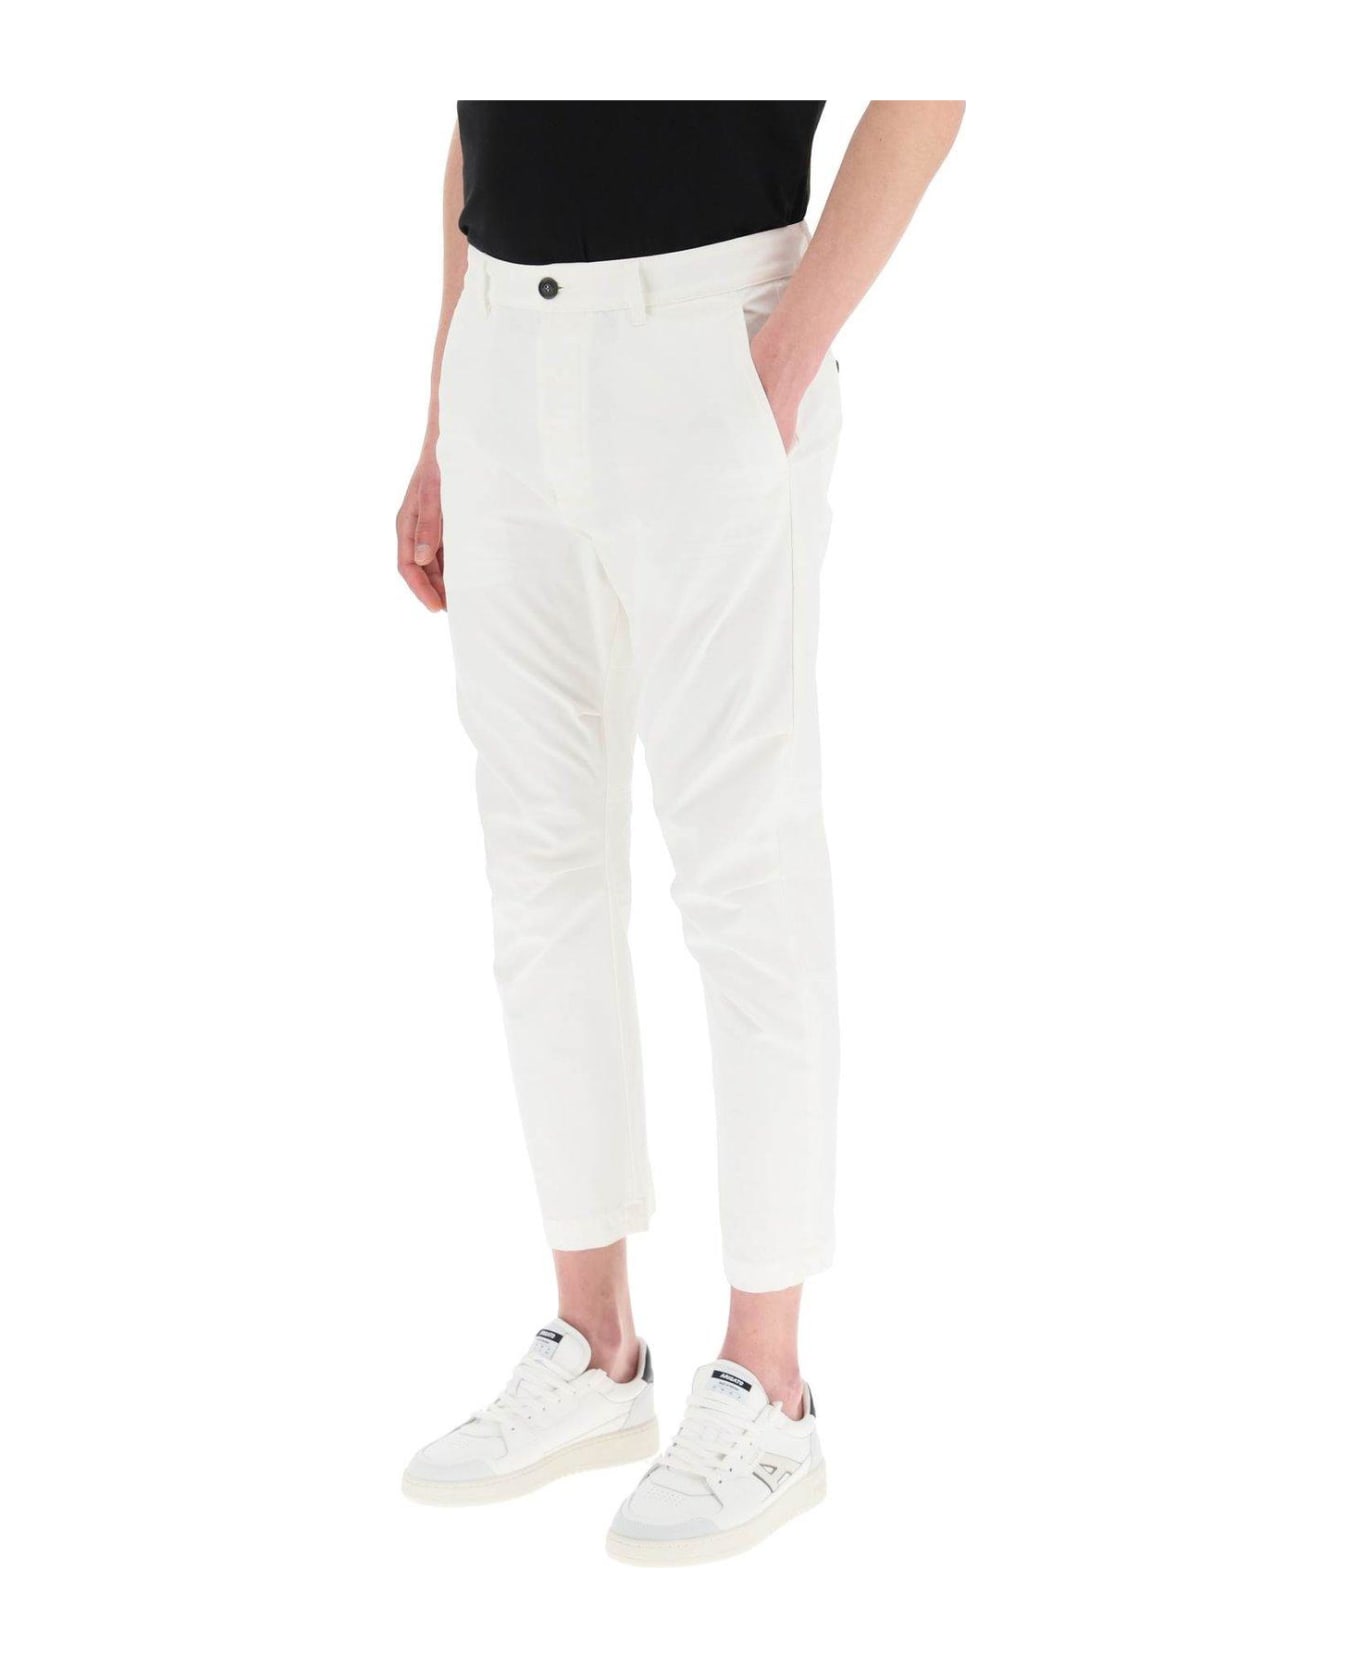 Dsquared2 Cropped Cargo Pants